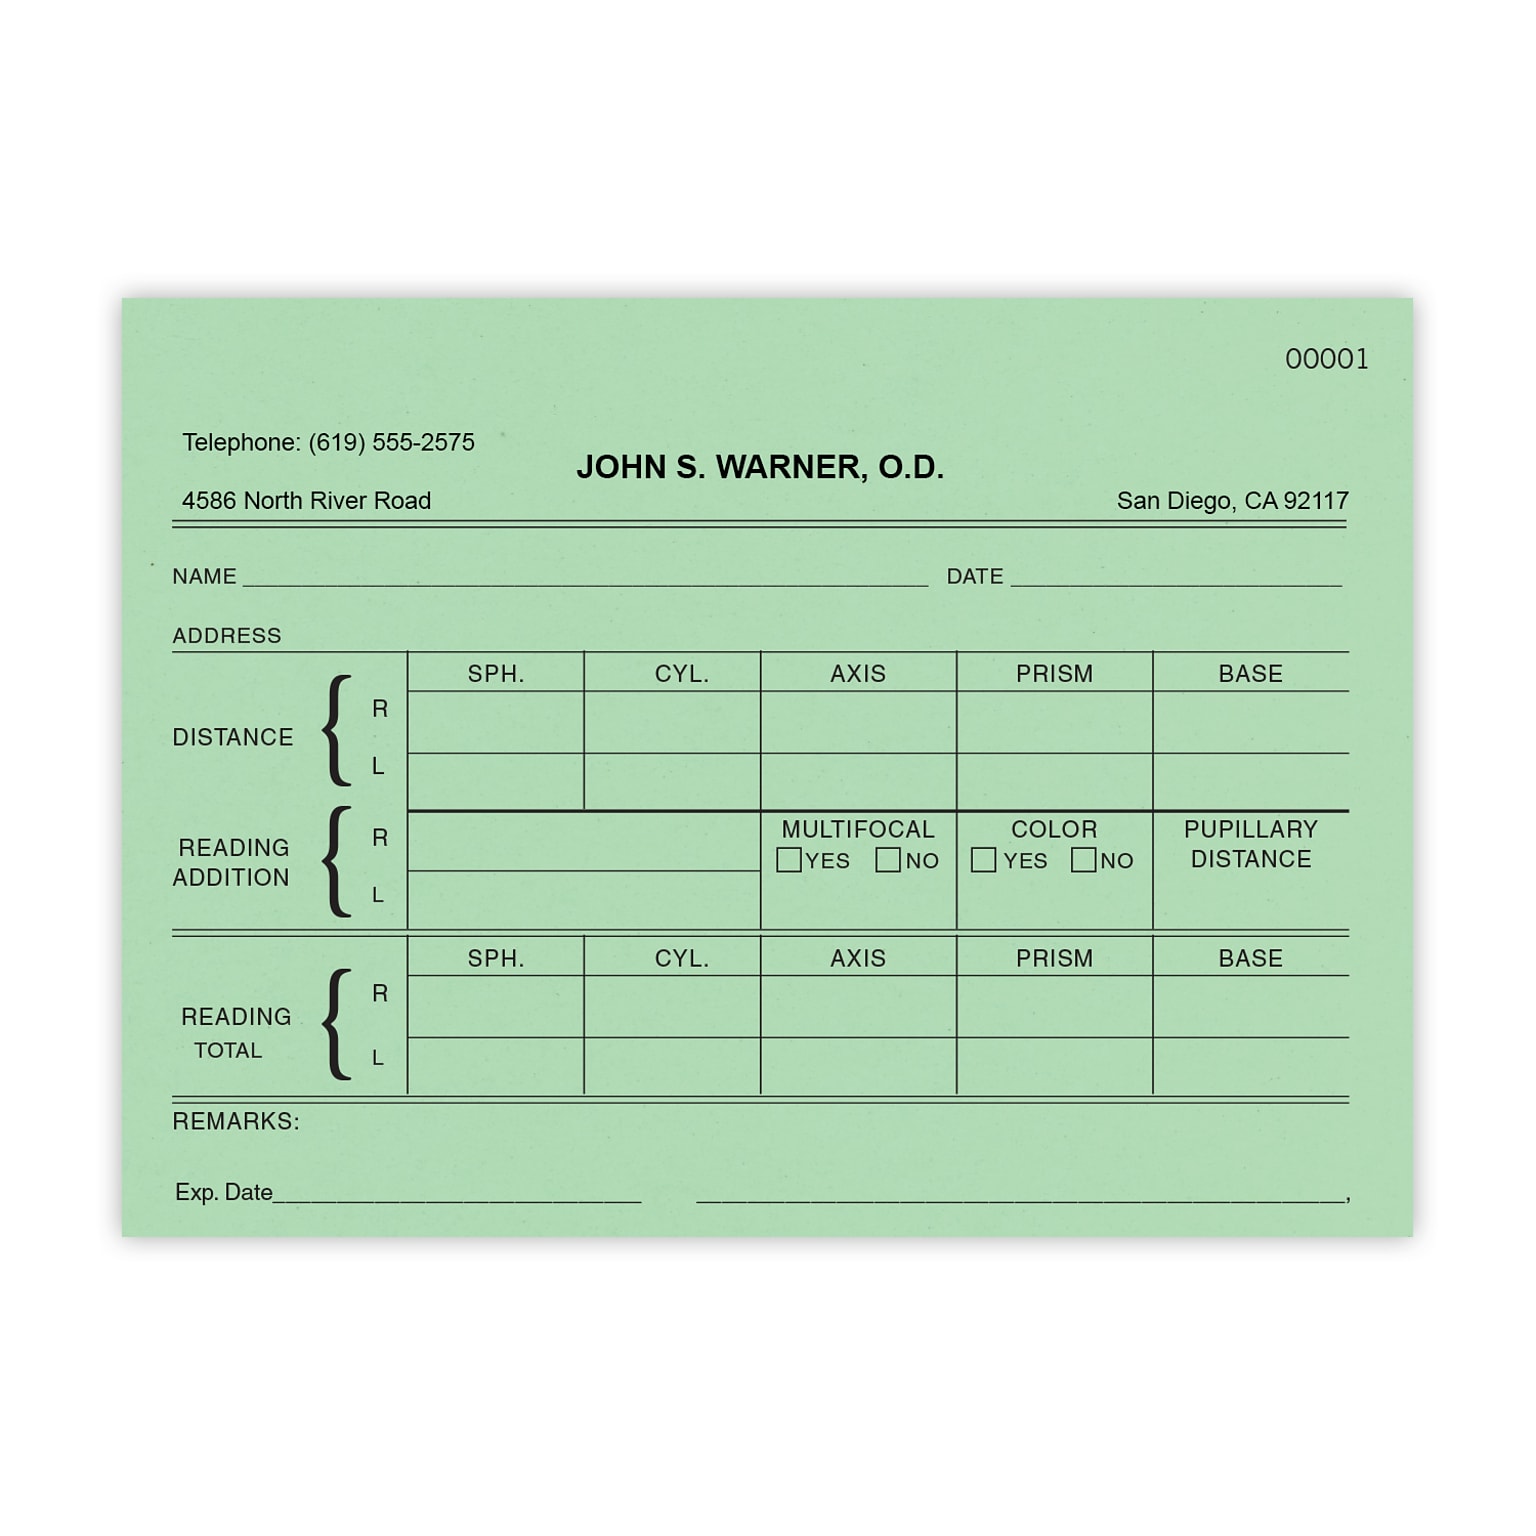 Numbered Optical RX Pads, Single Copy, Green Paper, 10 Pads per Pack